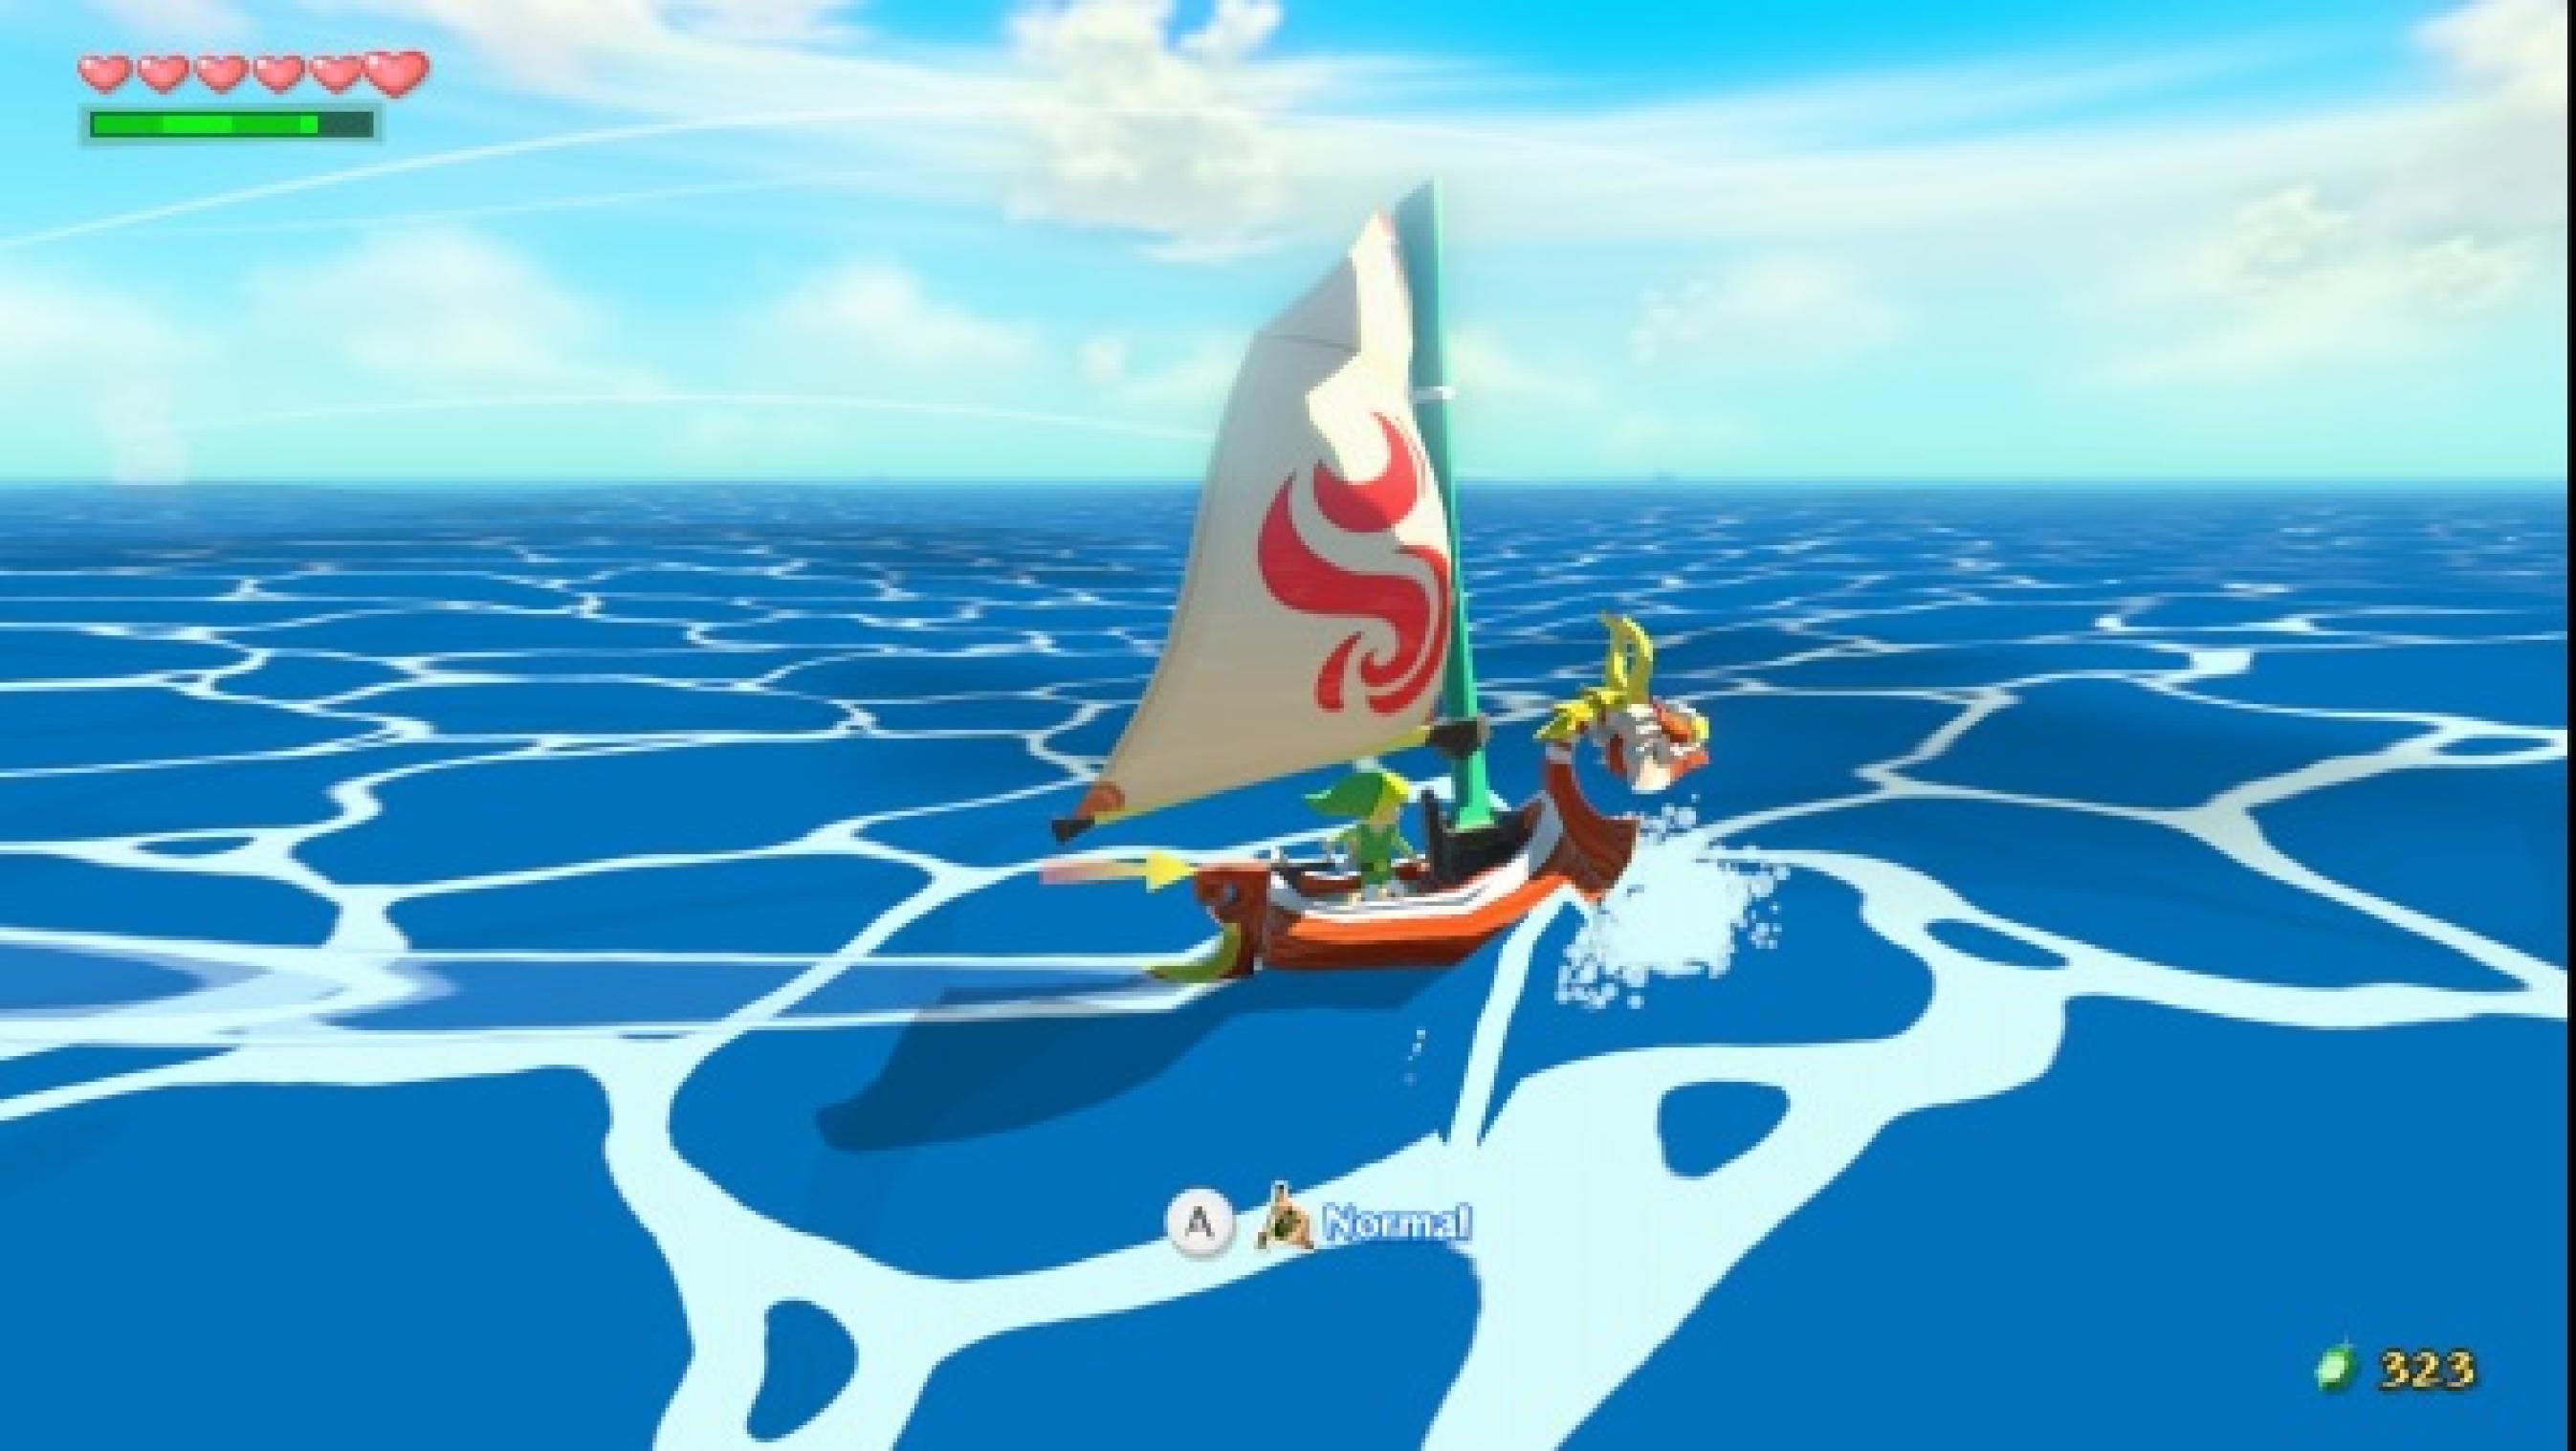 Zelda Skyward Sword Is Better Than The Wind Waker You’re Just Blinded By Nostalgia